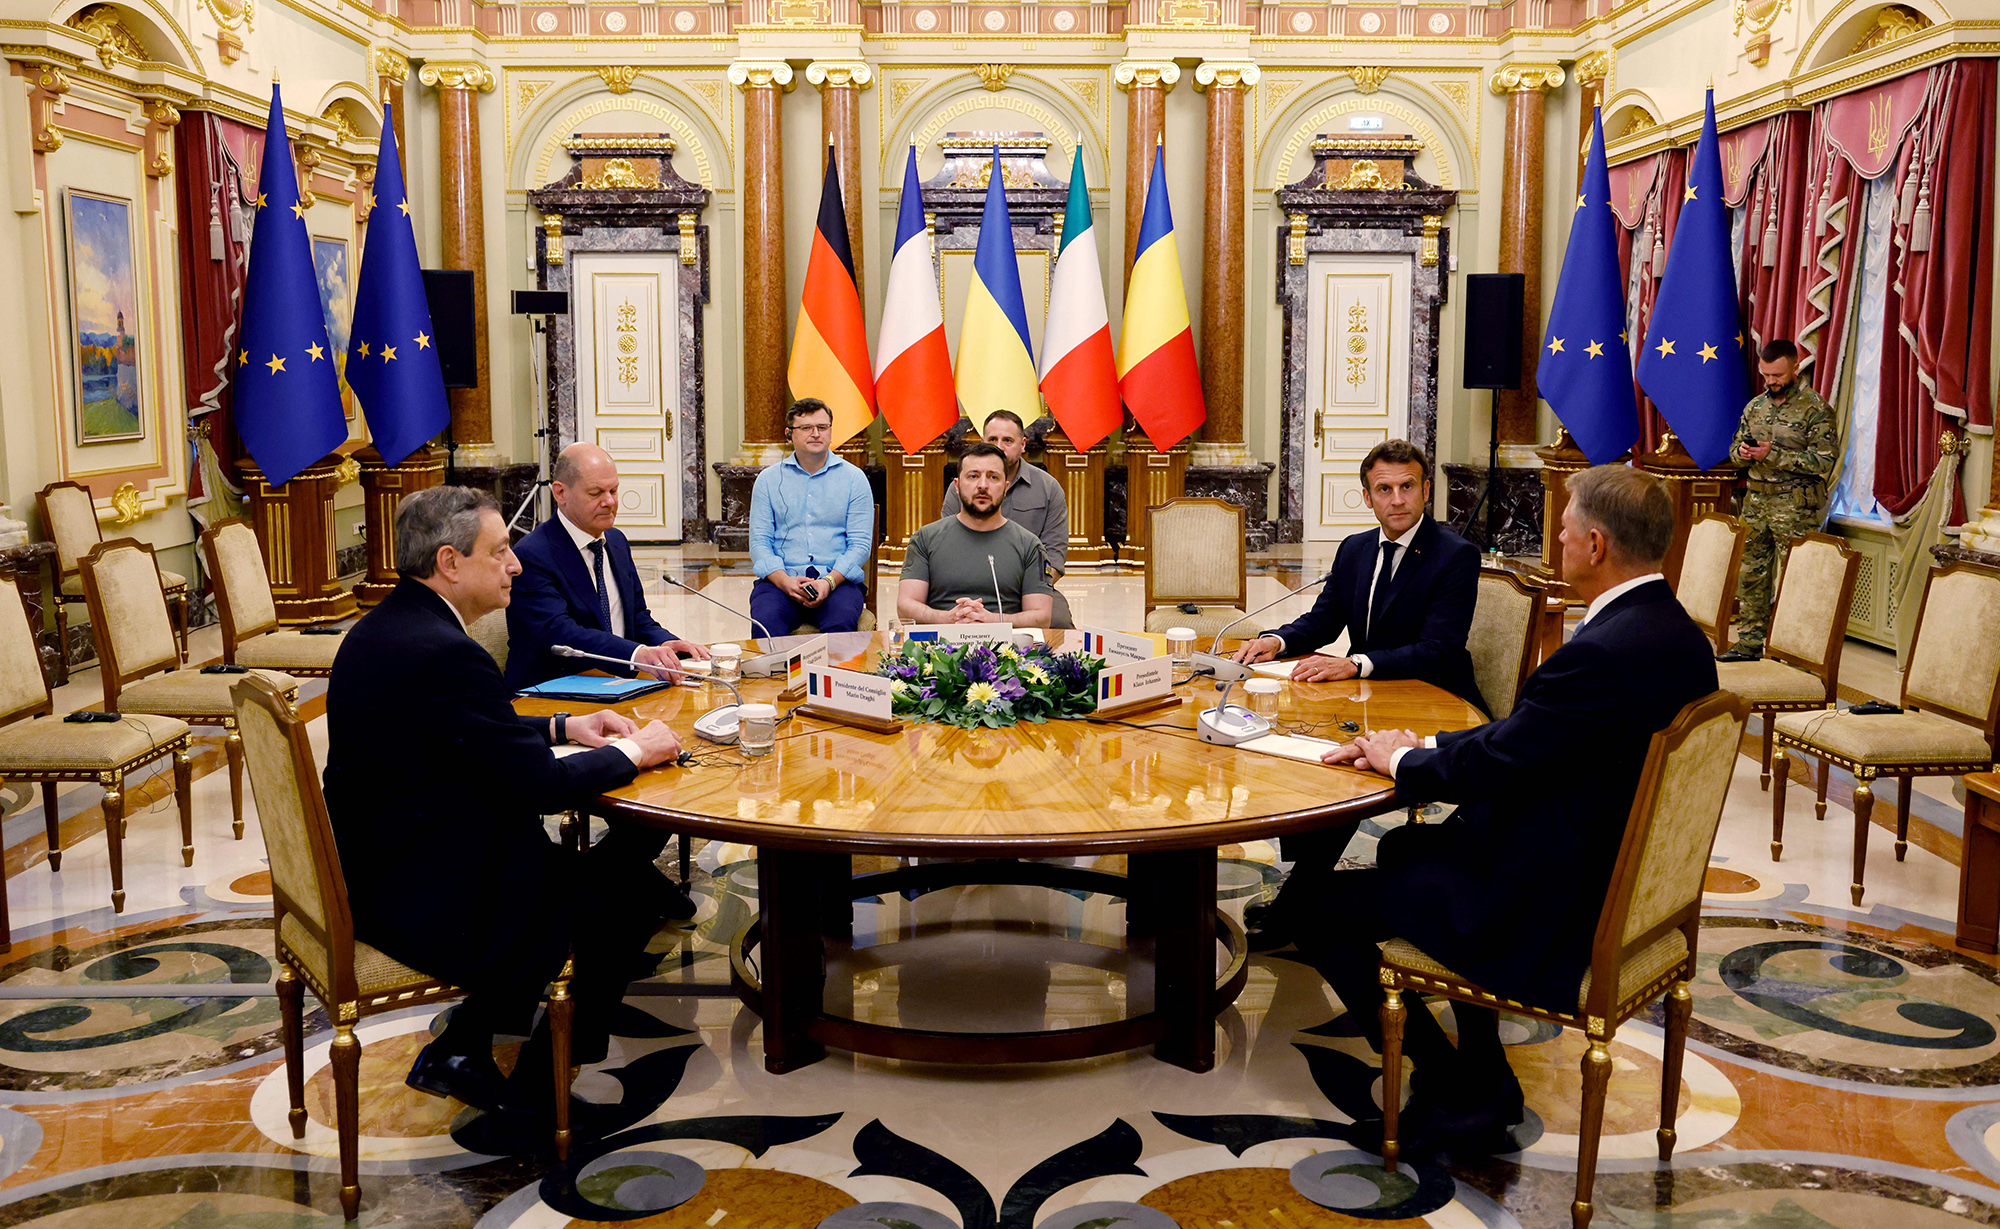 From left, Italian Prime Minister Mario Draghi, German Chancellor Olaf Scholz, Ukrainian President Volodymyr Zelensky, French President Emmanuel Macron and Romanian President Klaus Iohannis meet for a working session in Mariinsky Palace, Kyiv, Ukraine, on June 16.